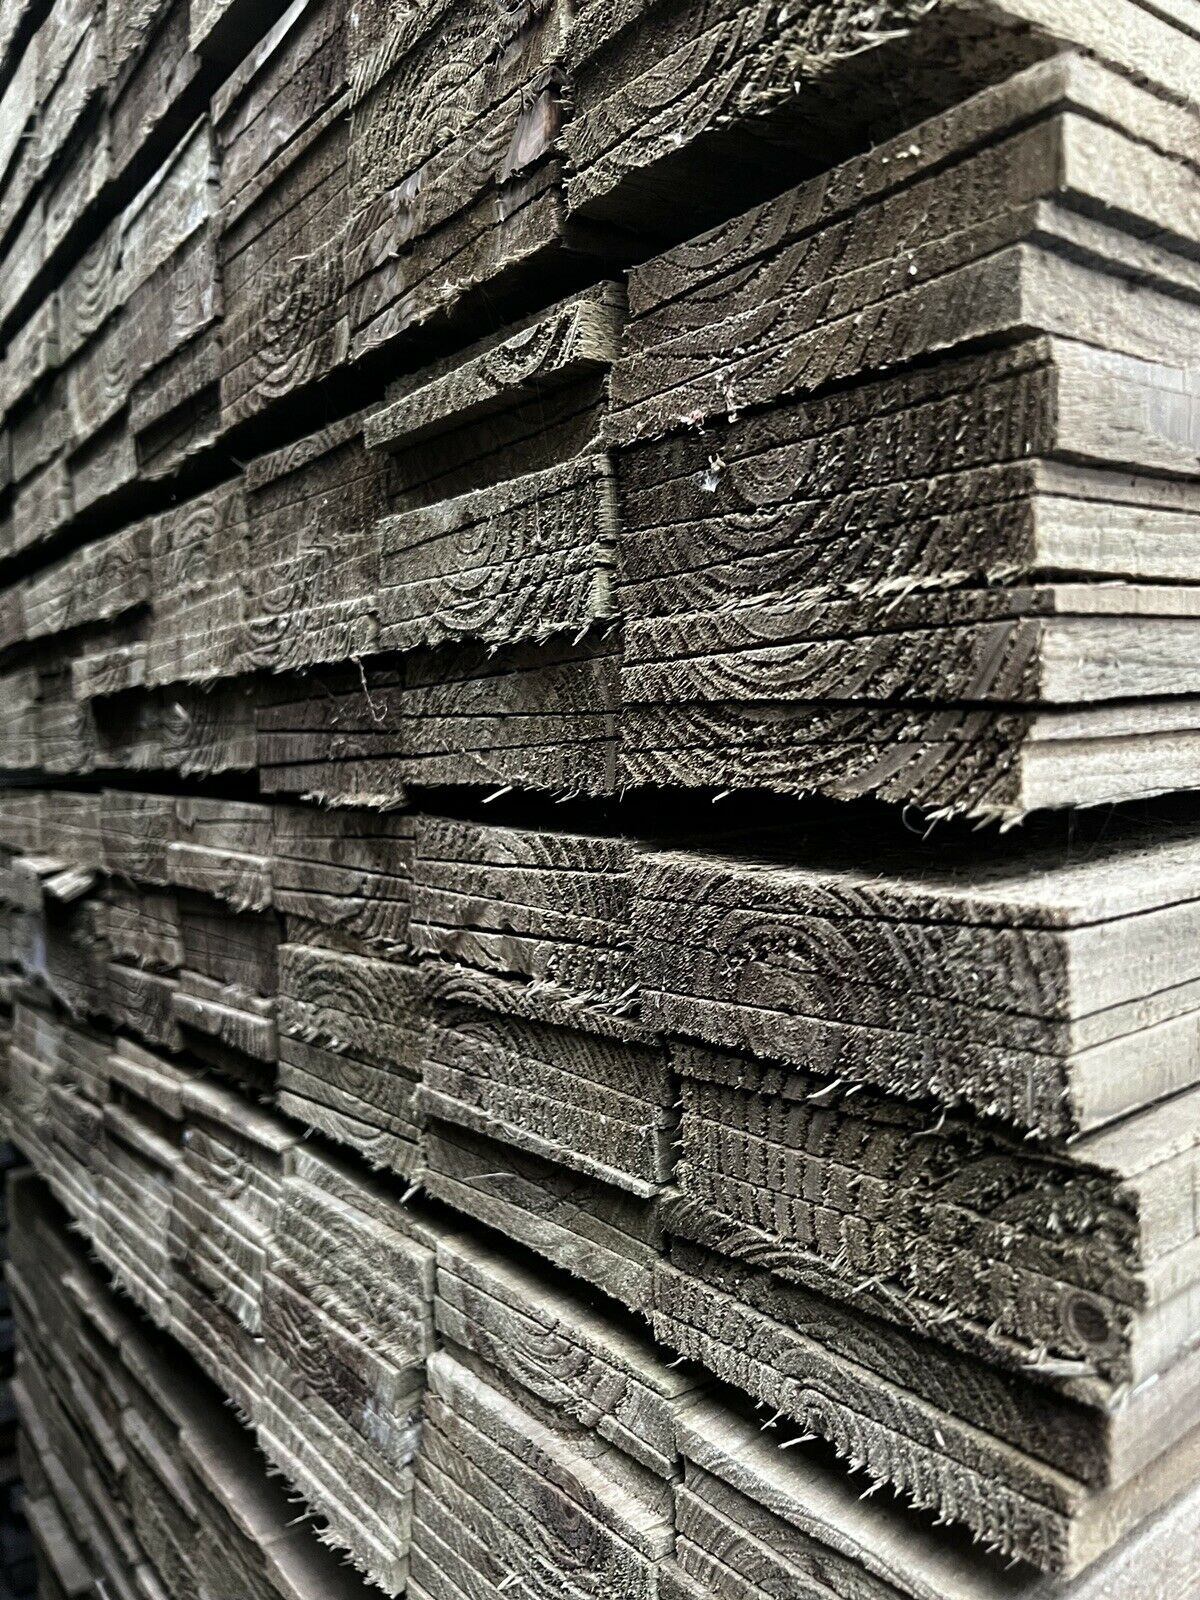 Stacked tanalised feather edge boards